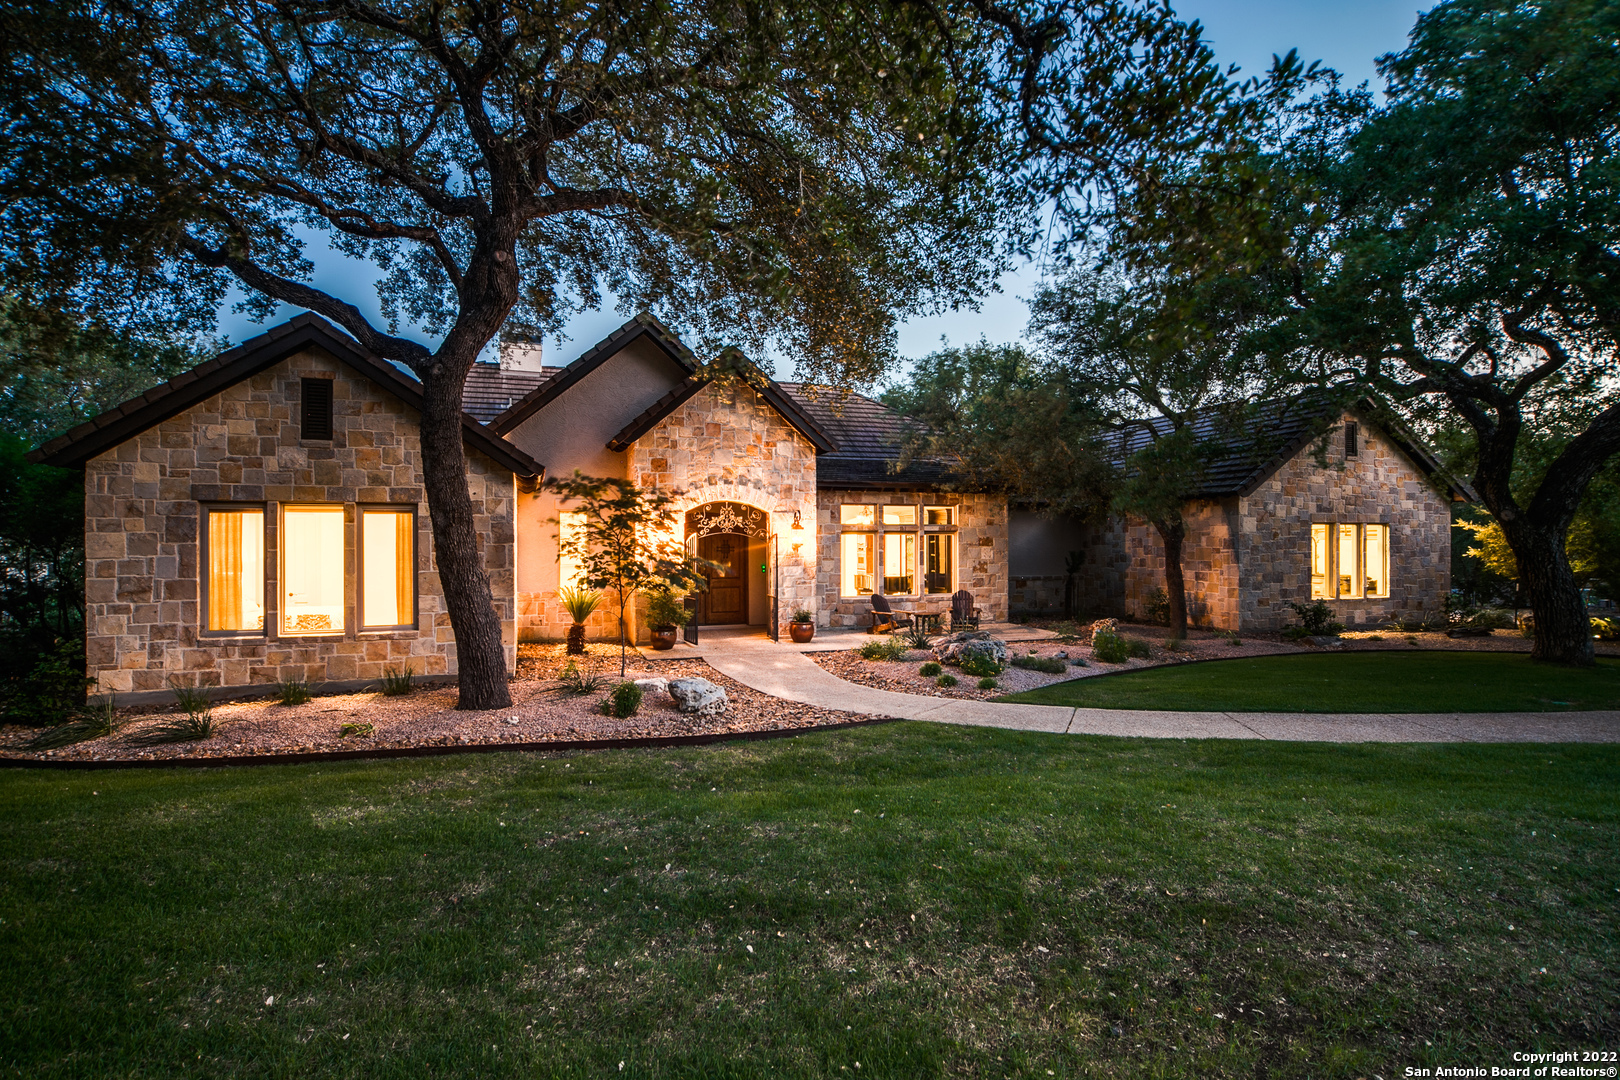 Find an escape from the hustle and bustle of the city with this gorgeous Hill Country gem. Nestled on an expansive lot with a bluff view and mature trees, this stunning countryside retreat's stone and stucco exterior opens to reveal a stately interior filled with quality craftsmanship. Rustic charm is found throughout the home's open floor plan in the form of high ceilings with exposed wood beams, tile and hardwood floors, arched doorways and exquisite mouldings. Located next to the grand double door entry is the formal dining room. The spacious family room features a patio access, surround sound wiring and a stone fireplace that extends to the crest of the cathedral ceiling. Take your culinary abilities to new heights in the spacious island kitchen, complete with granite counters, tile backsplash with a mosaic centerpiece, stainless steel appliances, a casual dining nook with bow windows and pendant lighting suspended over an eat-in breakfast bar. Boasting a tray ceiling, bow windows and a walk-in closet, the relaxing primary suite exudes an aura of refined elegance. Equipped with dual vanities, an inset whirlpool tub and separate shower, the primary en suite bath is perfect for melting away stress after a long day. Other distinguishing features include a private office and reading room with French doors and custom built-ins, as well as well-appointed secondary bedrooms. Just behind the home is an incredible outdoor paradise, which contains a covered patio with an outdoor fireplace, summer kitchen and patio speaker wiring, a Keith Zars pool and waterfall, plenty of mature trees and a detached Casita of 720SF, which includes a large living area, and an additional bedroom and bath. With the casita this house is a total of 4428SF priced at $375/SF. Whole house generator ($26,000) installed in 2021. Social country club membership is available.